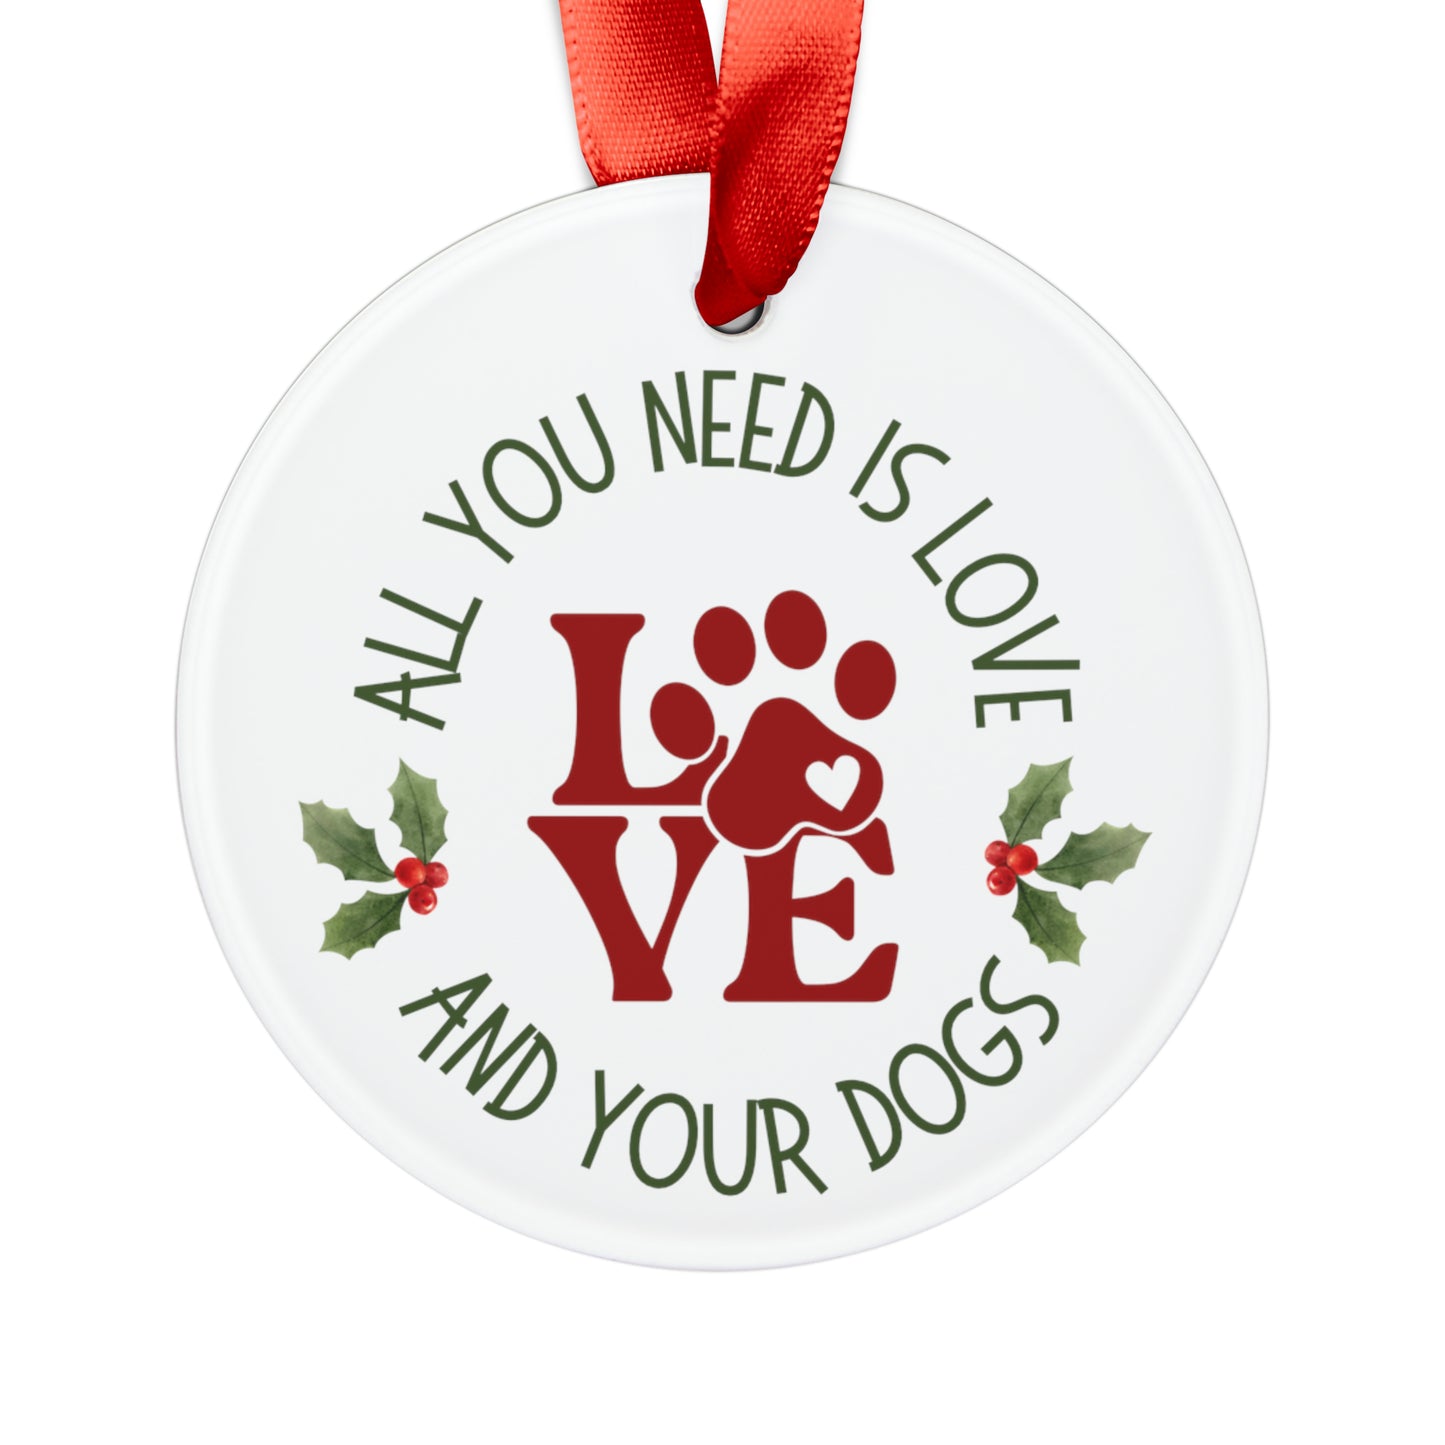 German Shepherd  Holiday Ornament with Ribbon